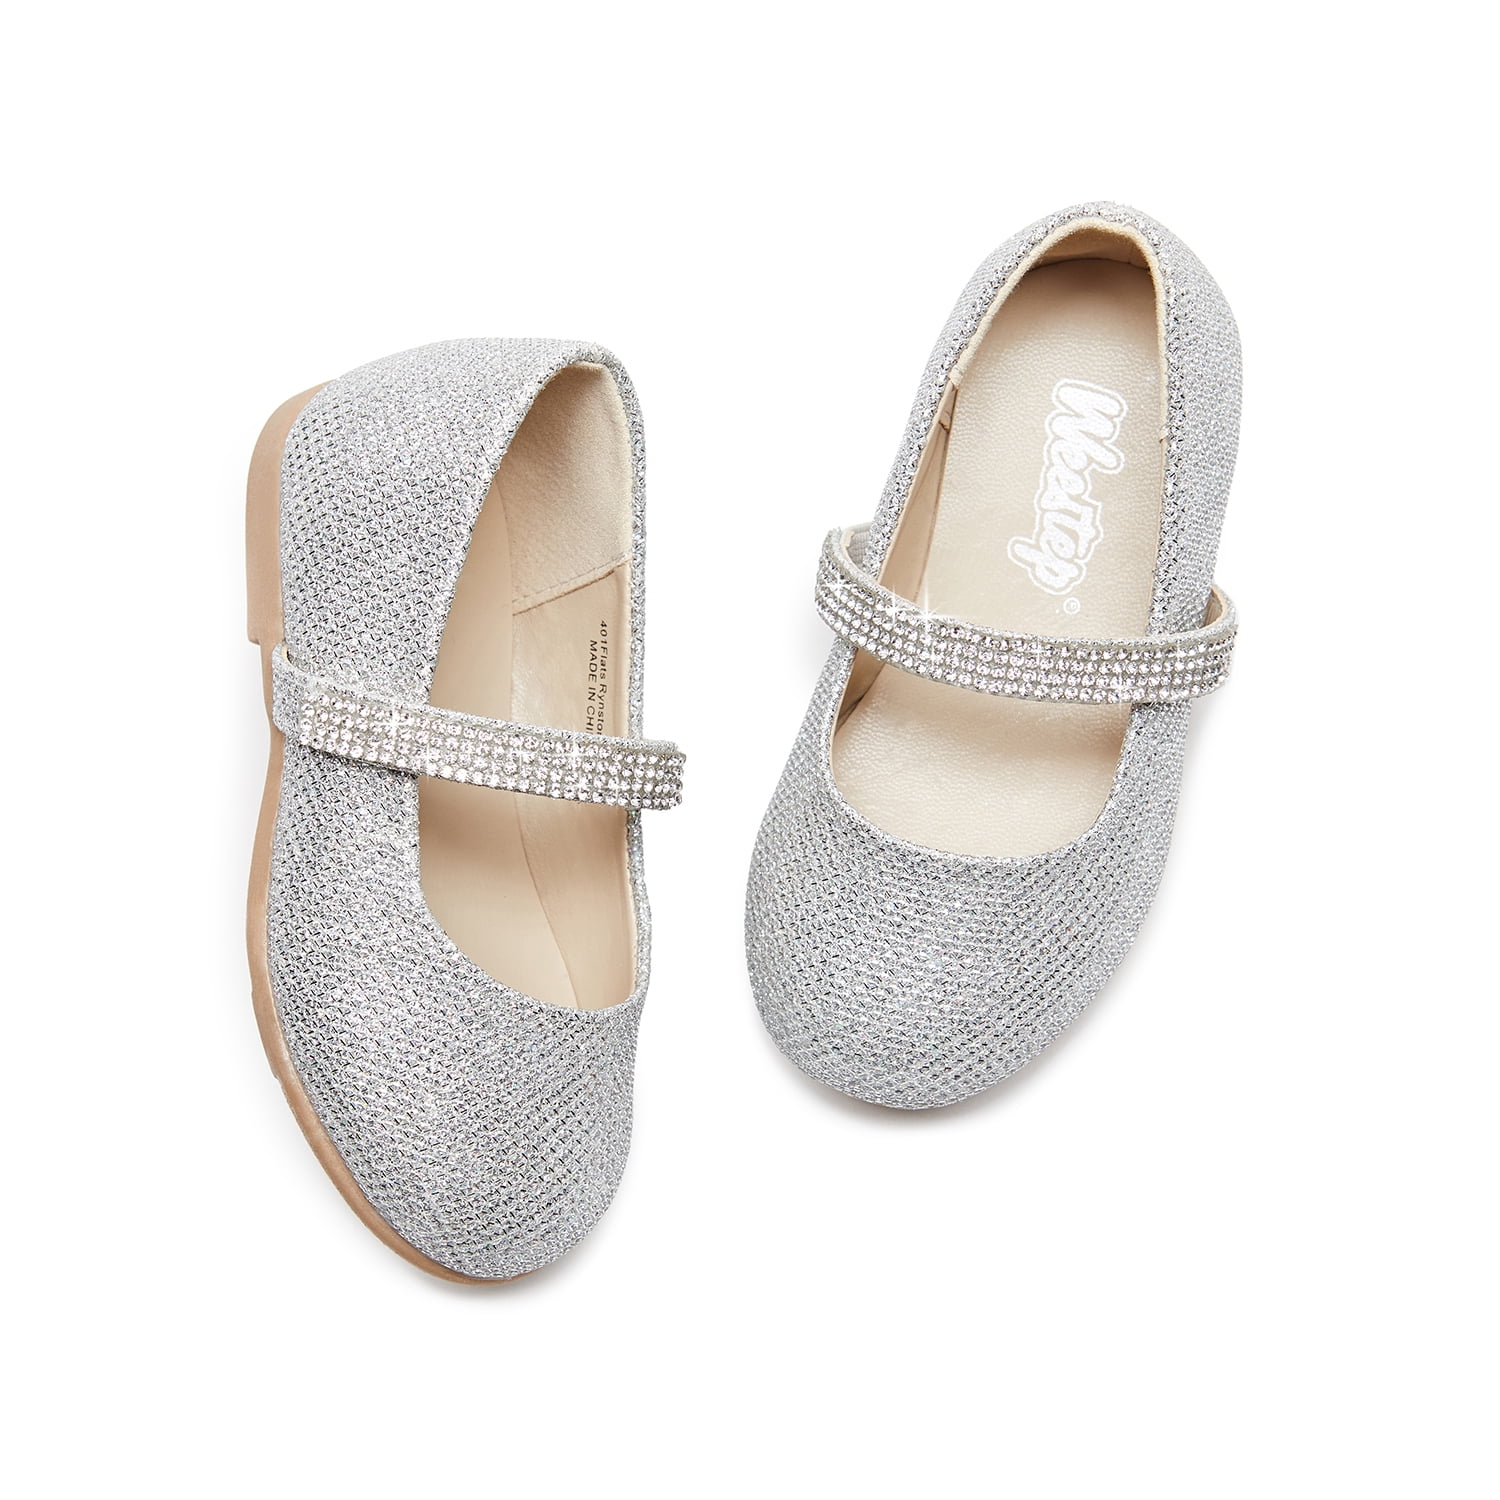 NEW Girls Toddlers JUMPING BEANS MALTA SILVER Mary Jane SlipOn Flats Shoes 